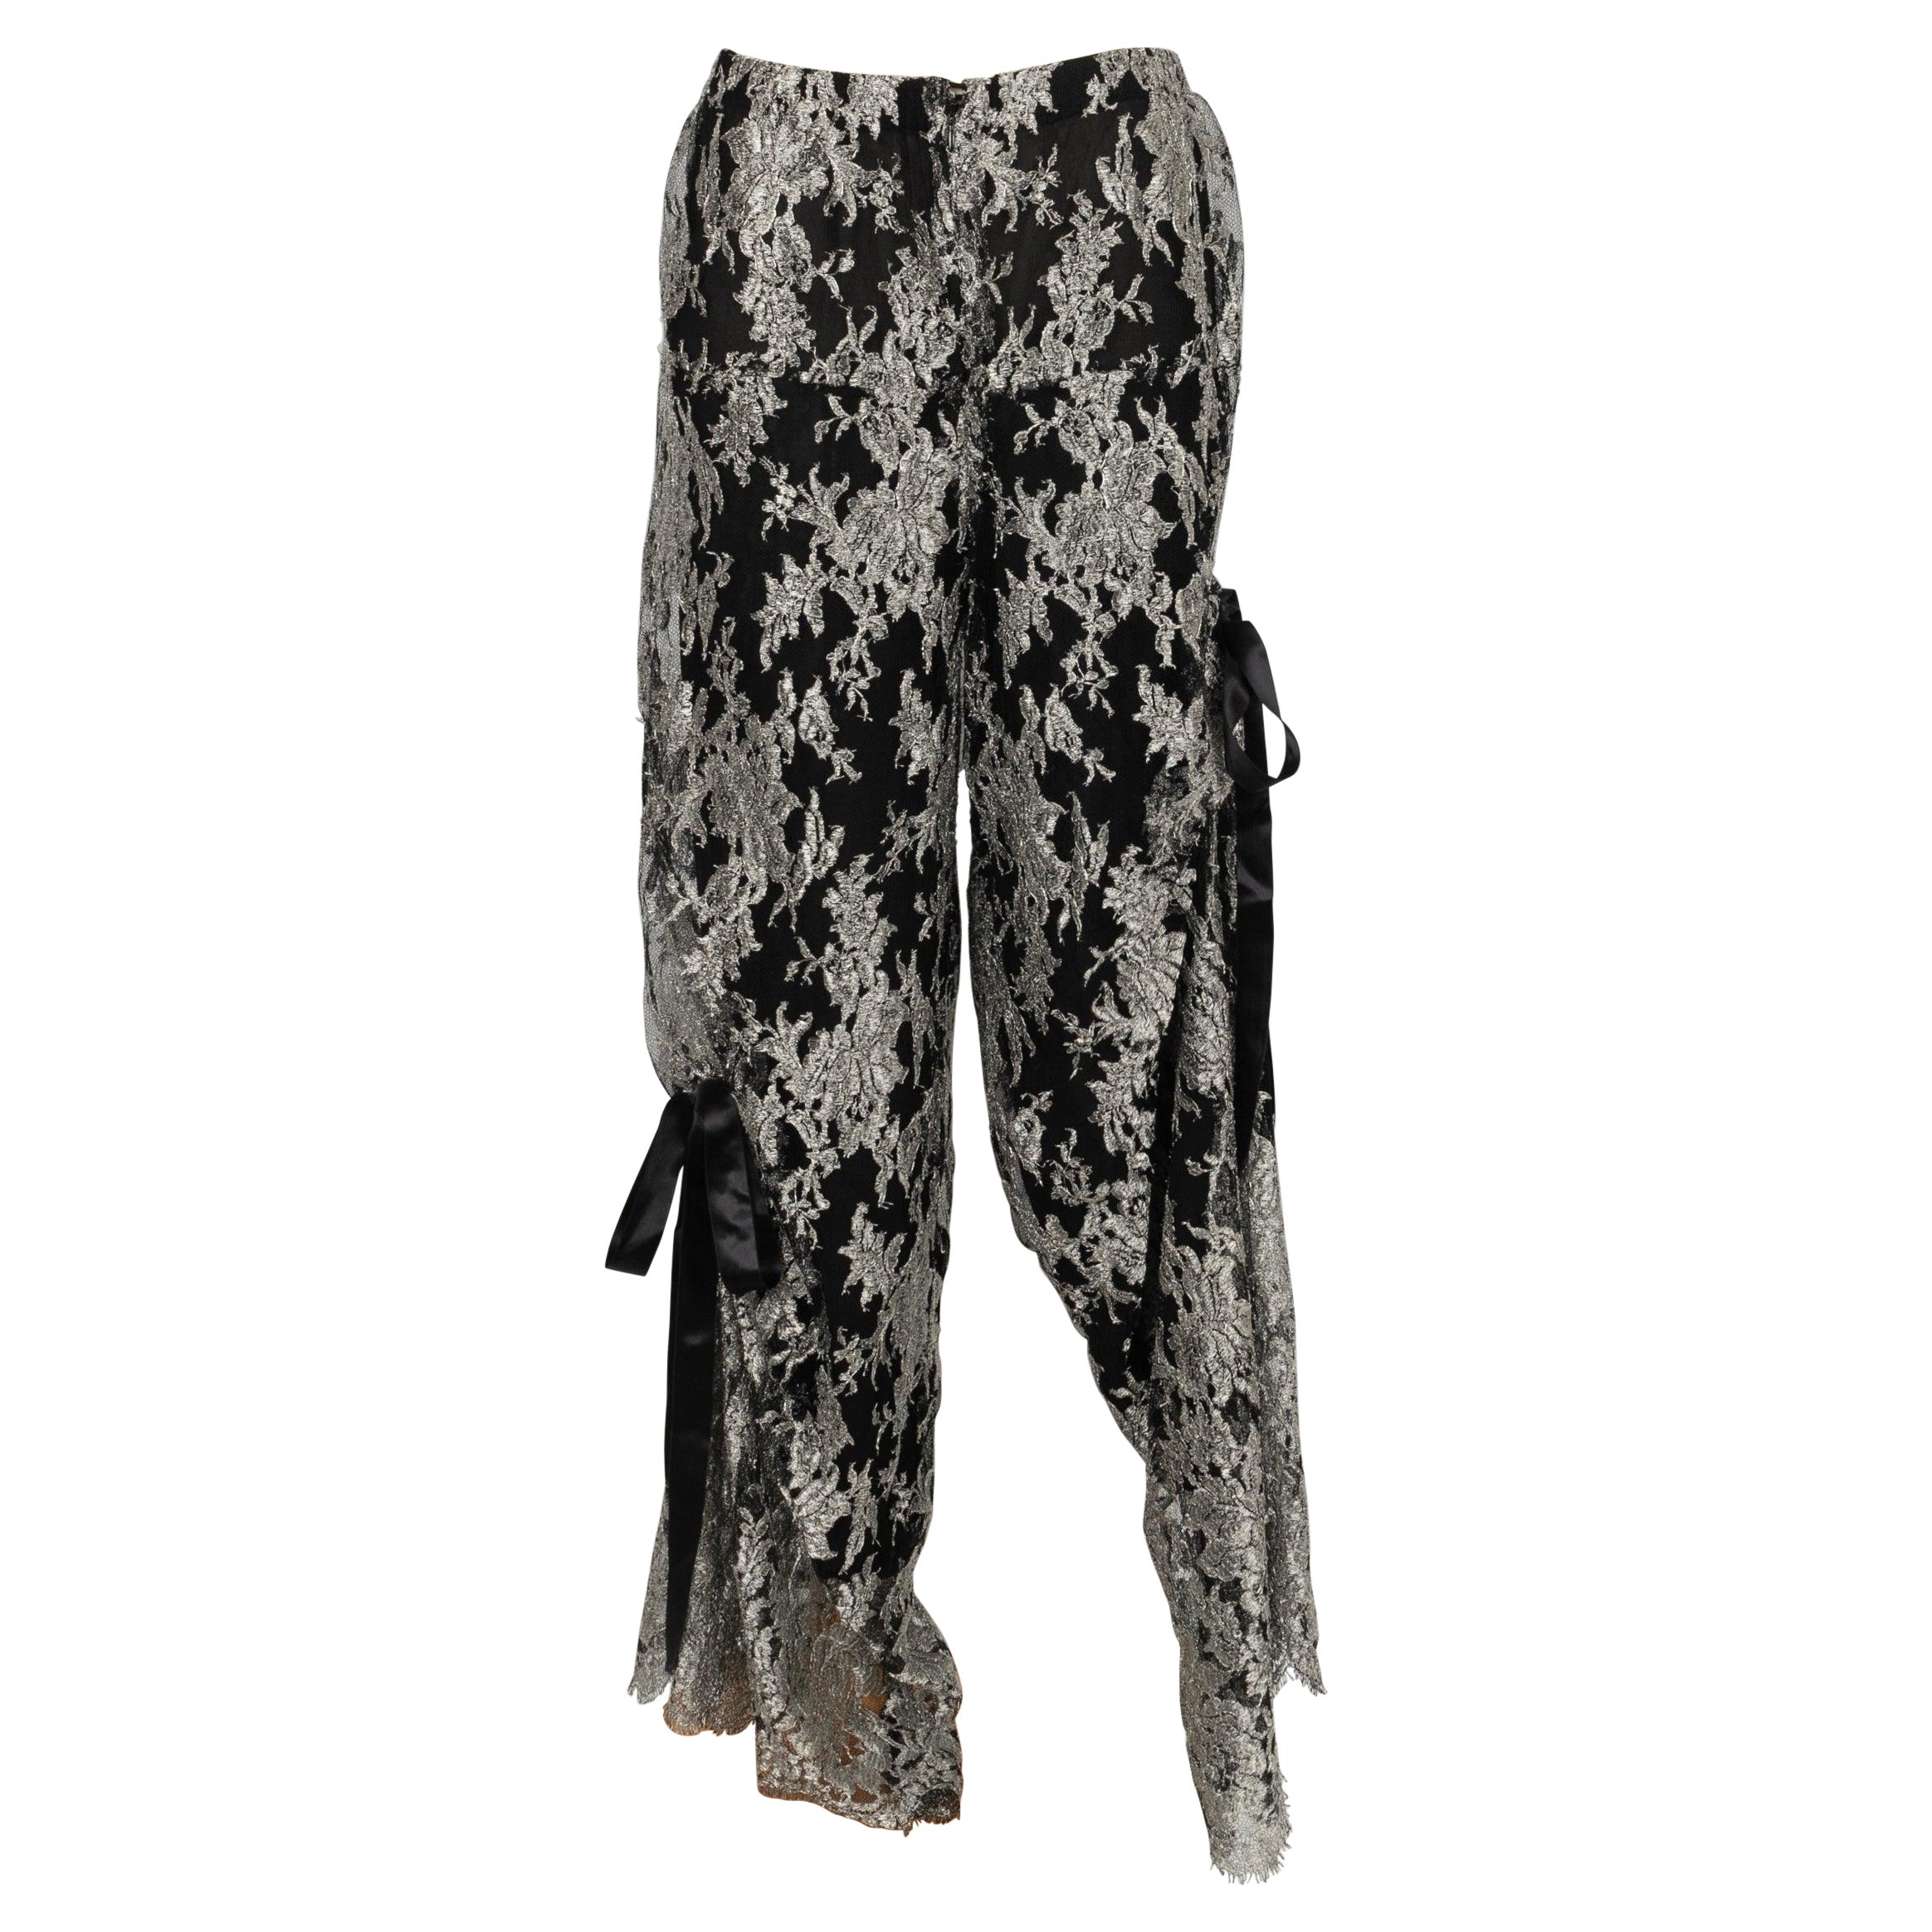 Christian Lacroix Pants Embroidered with Silvery Lurex Yarns